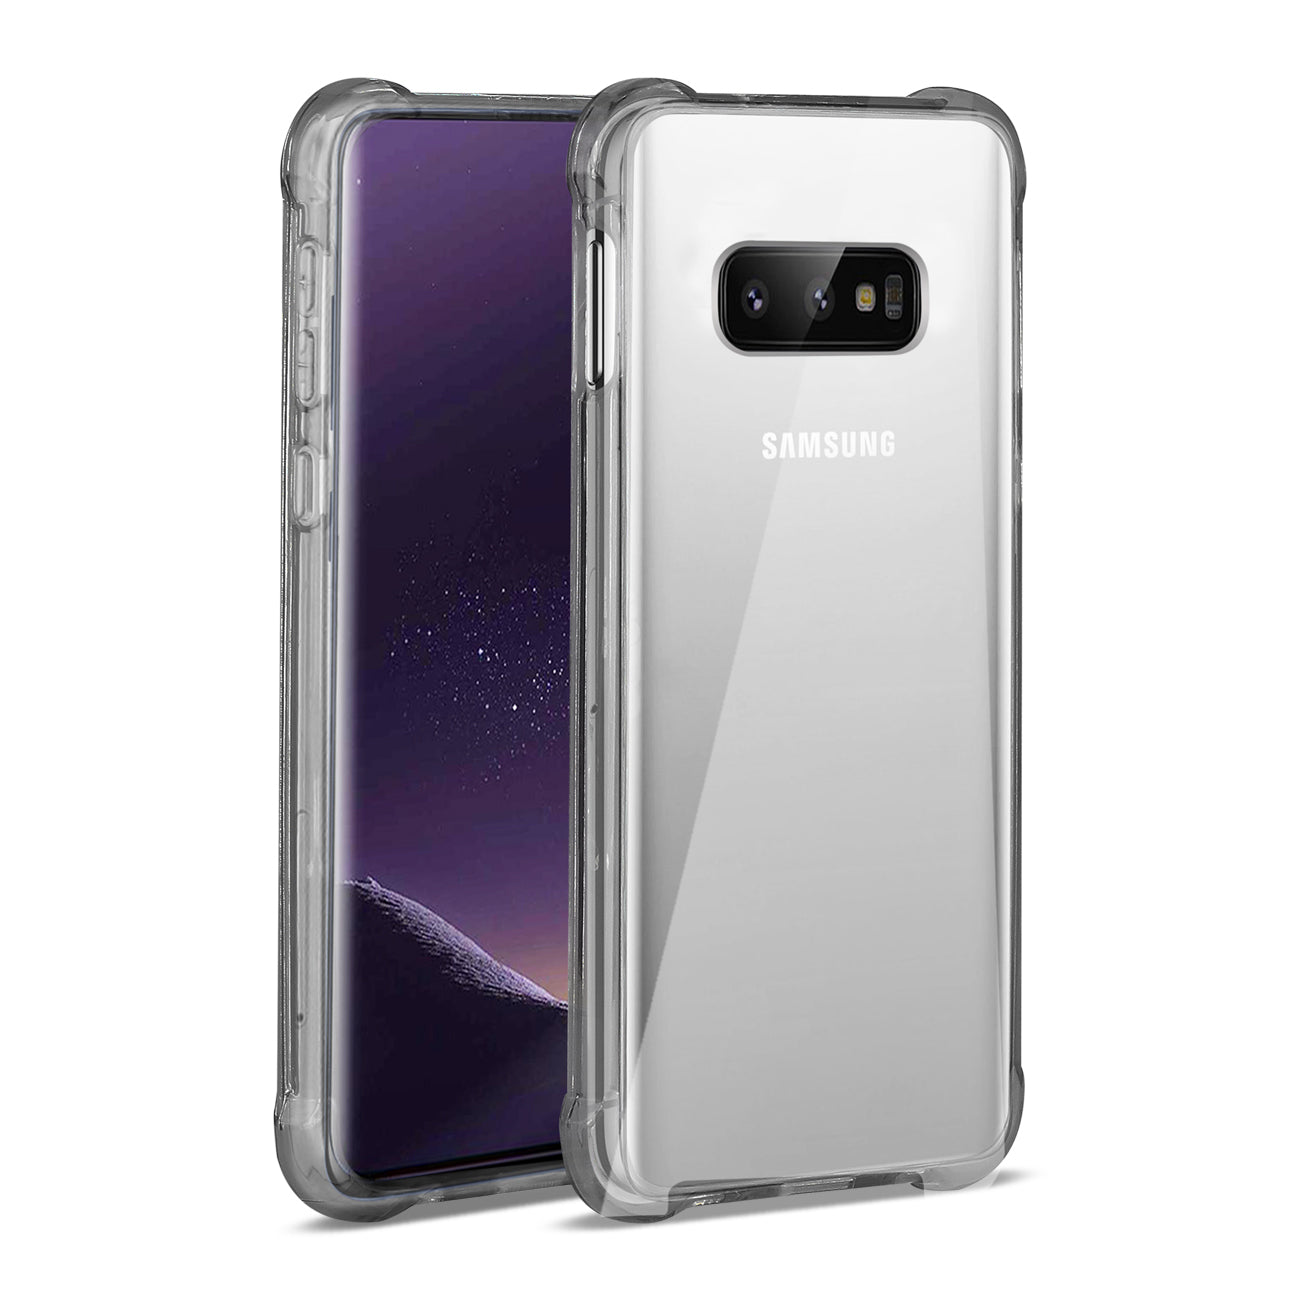 SAMSUNG GALAXY S10 Lite(S10e) Clear Bumper Case With Air Cushion Protection In Clear Black